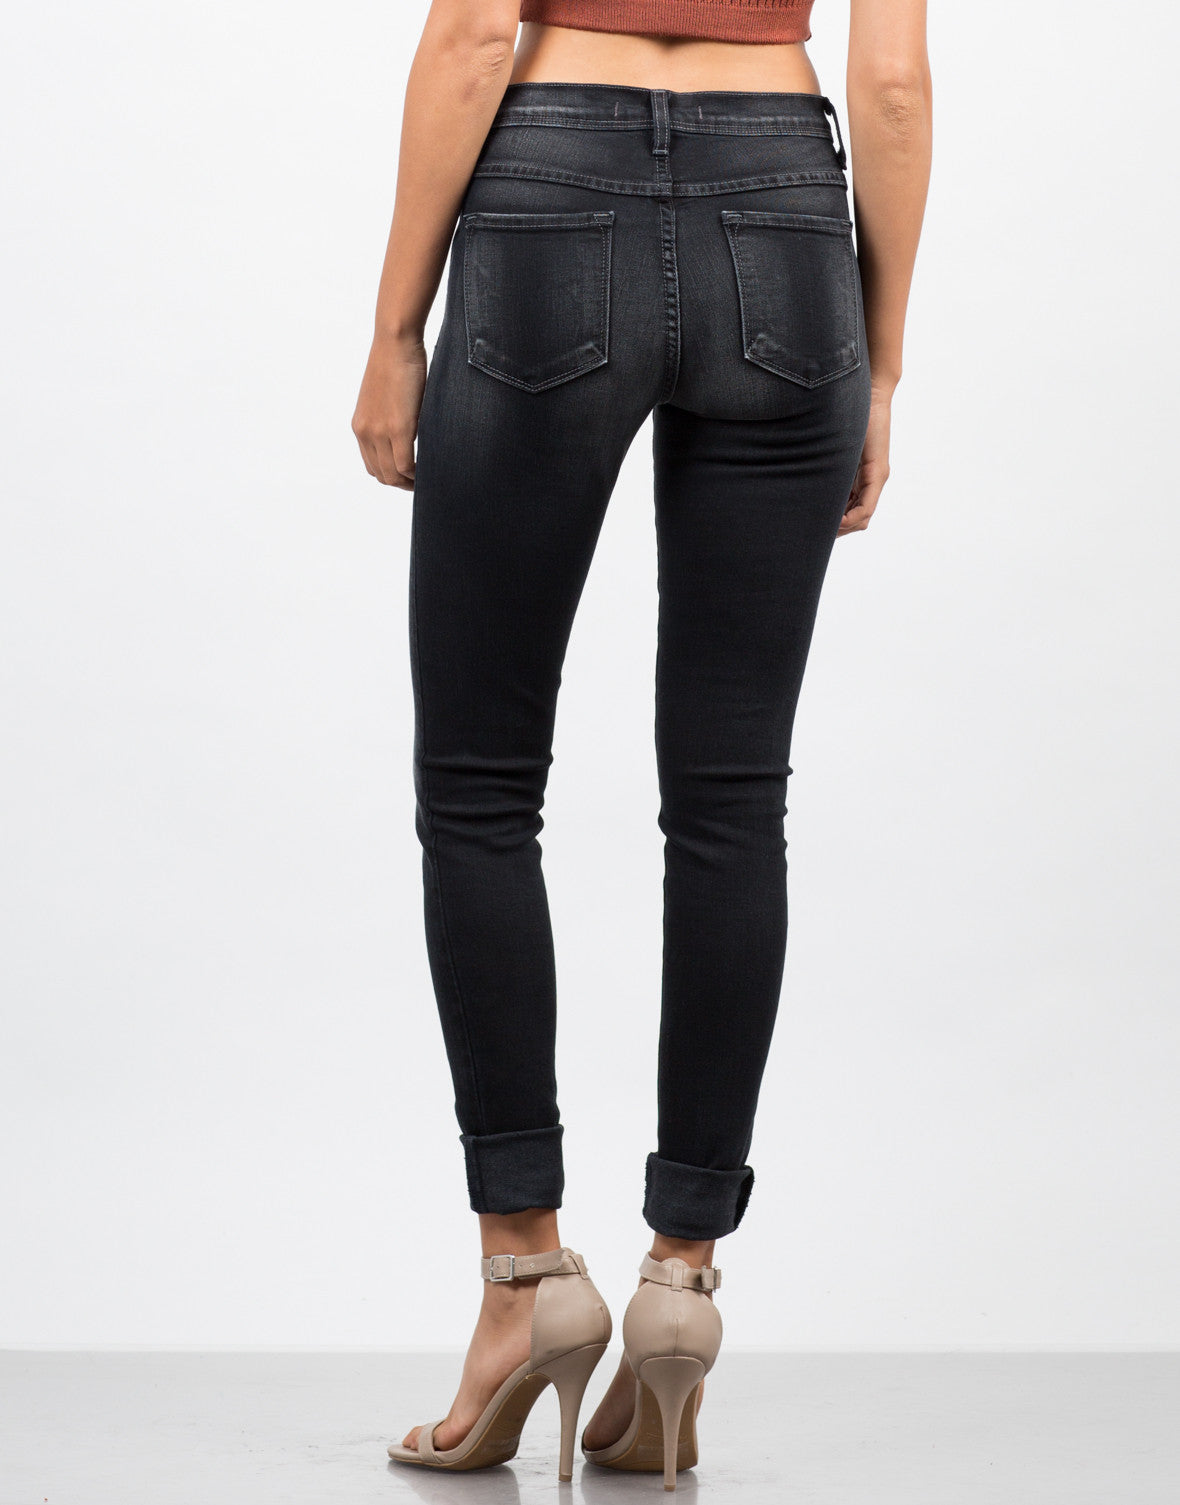 Faded High Waisted Jeans - Black Jeans - Fade Denim – 2020AVE